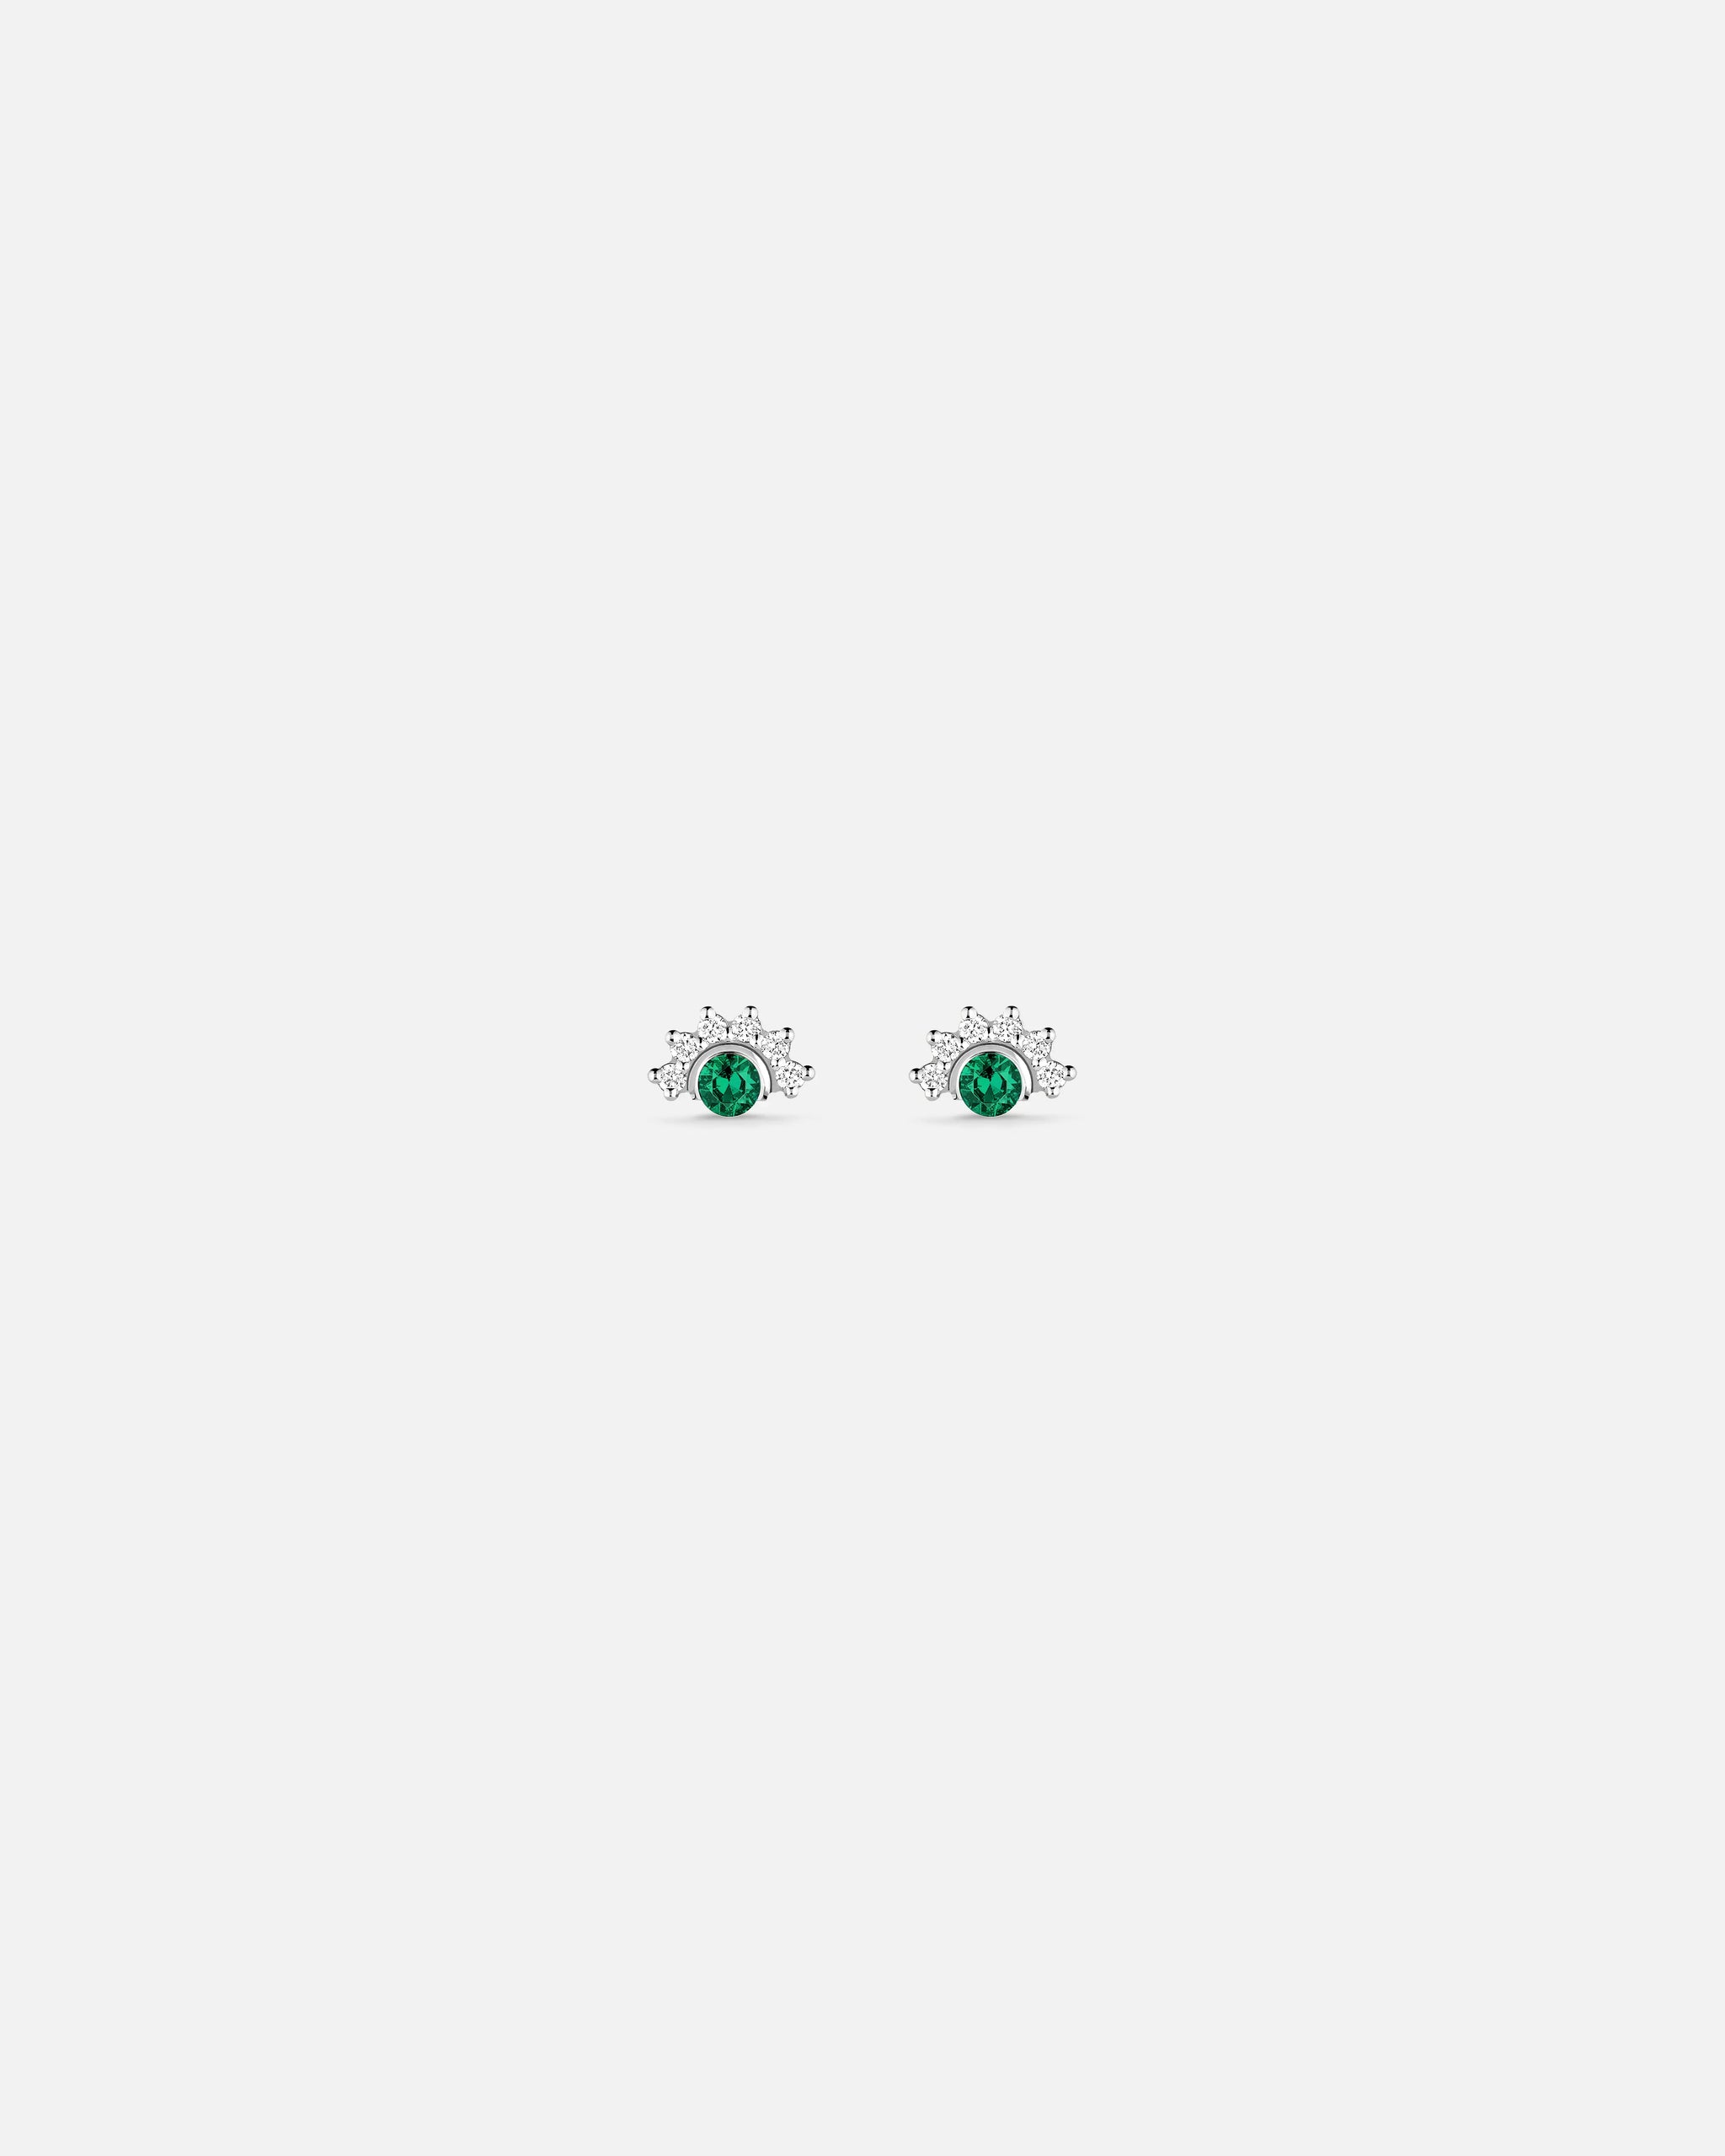 Green Tourmaline Studs in White Gold - Nouvel Heritage - Nouvel Heritage